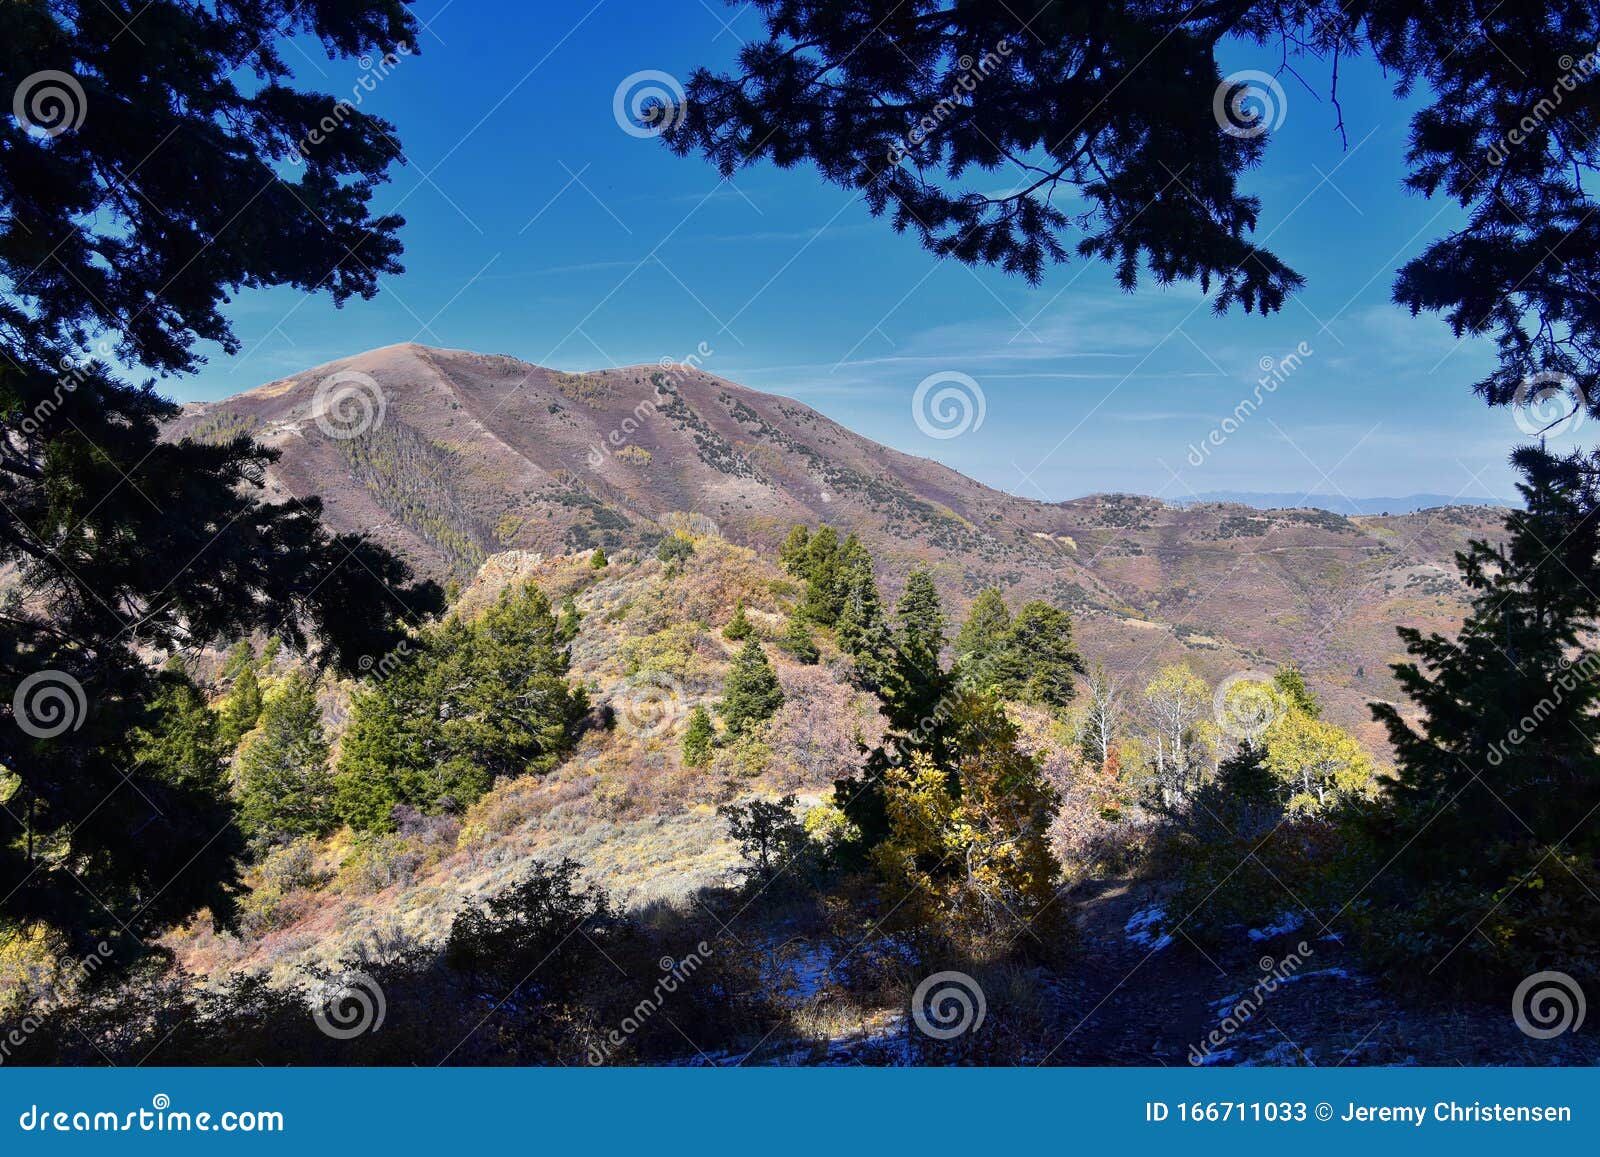 Butterfield Canyon Hiking Path Views of the Oquirrh Range Along the